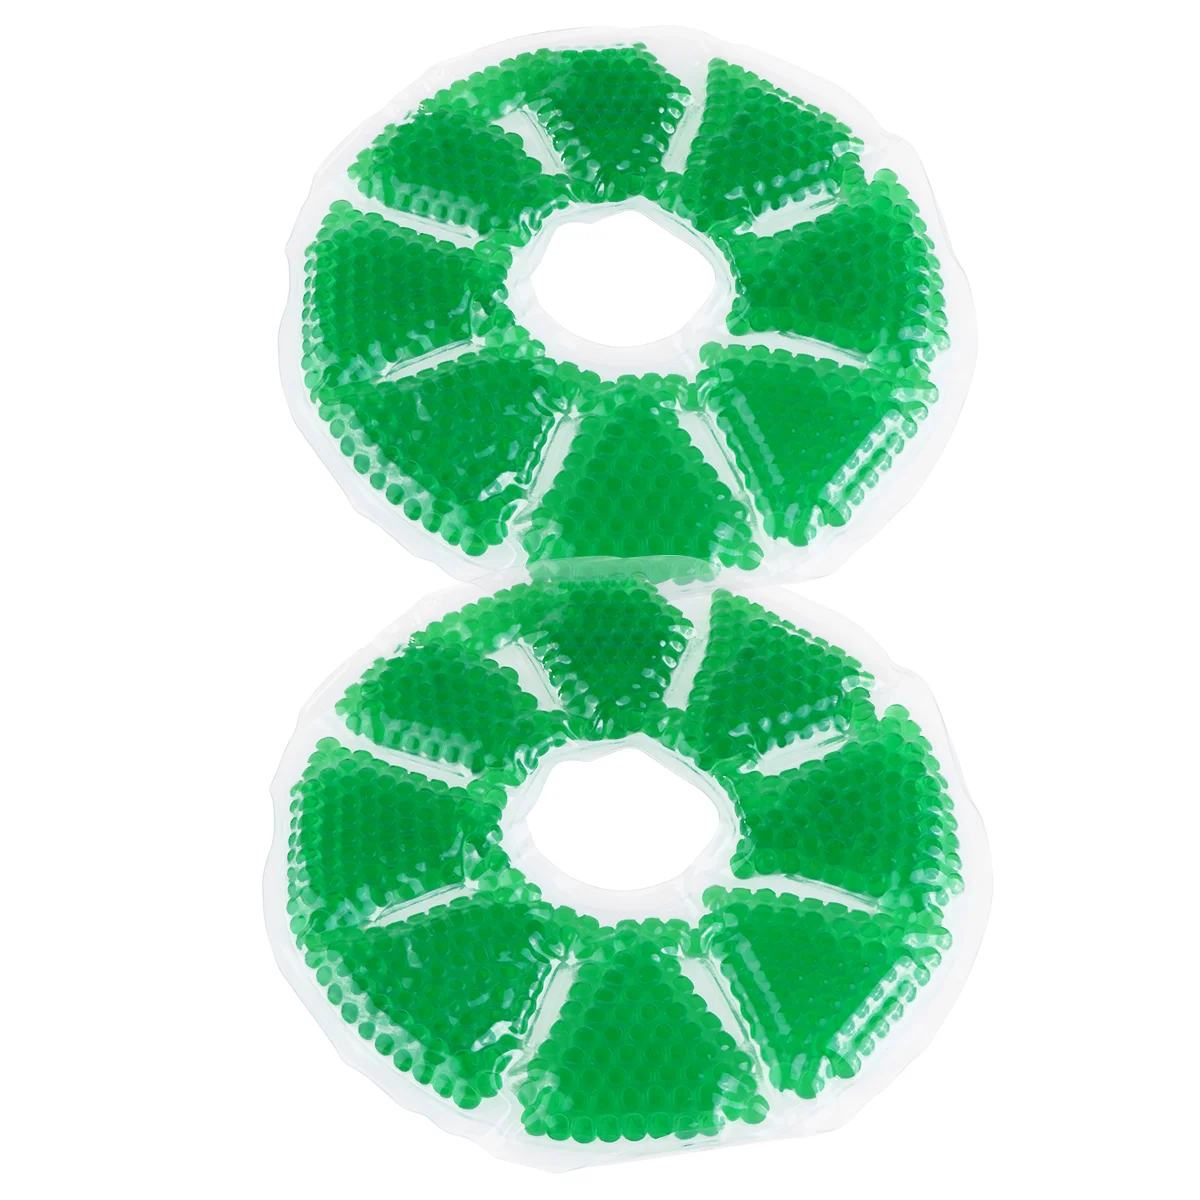 

2 Pcs Closed Round Pvc Care Relieves Breastfeeding Mother Supplies Gel Ice Beads Hot Cold Compress Pads Green Suits